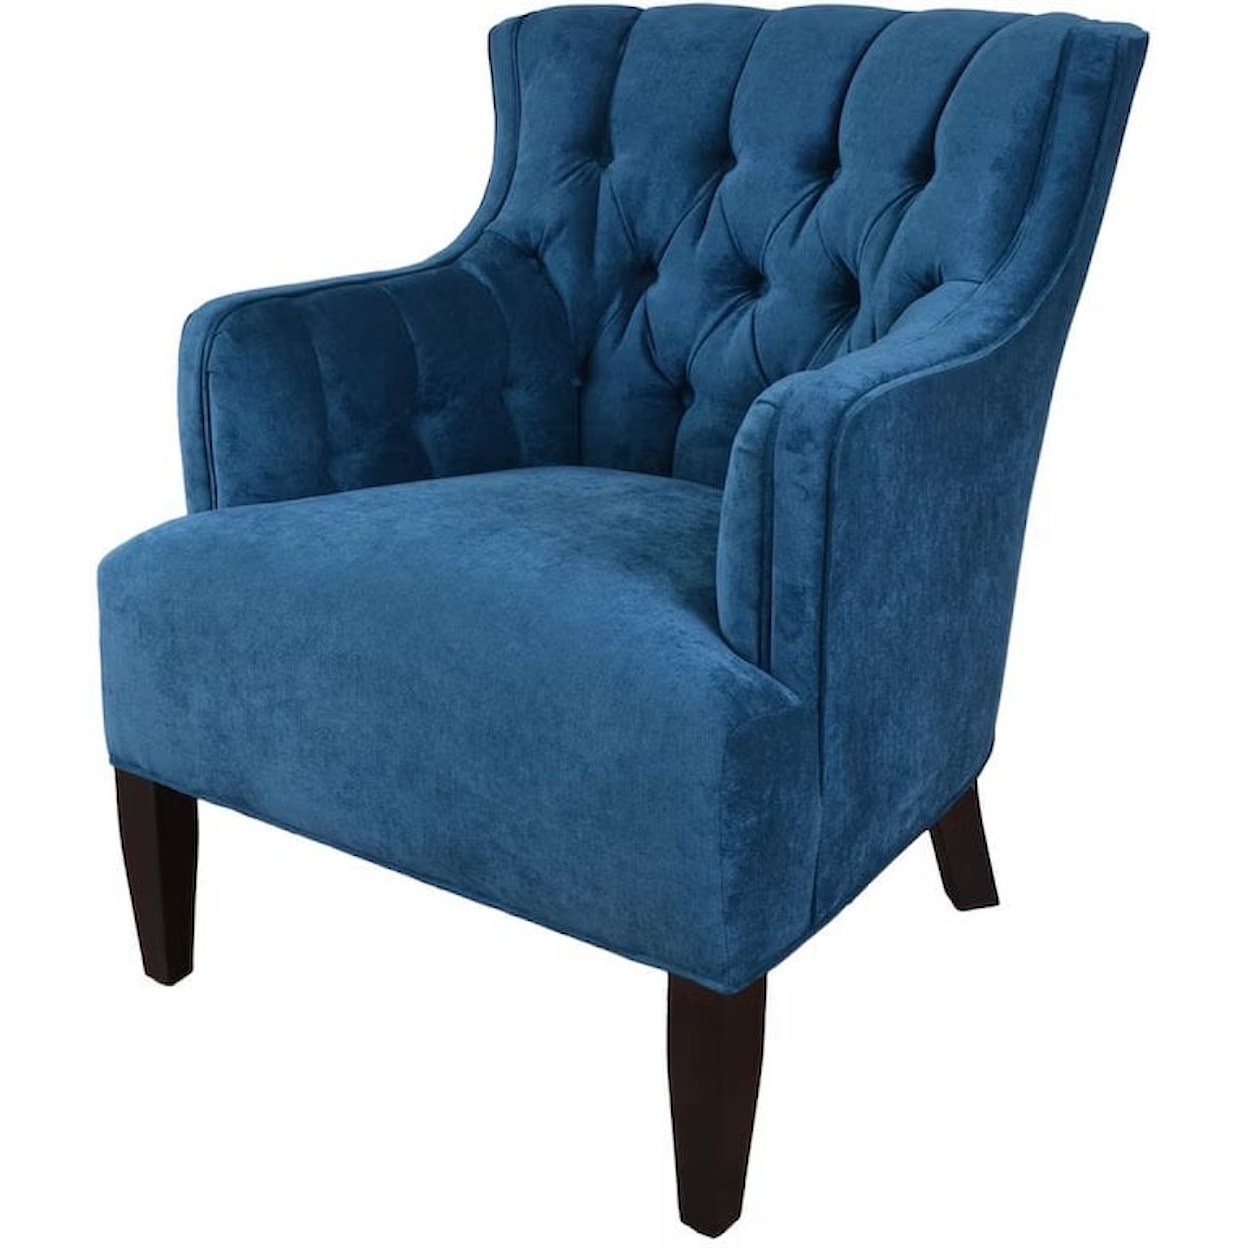 Craftmaster 027010 Wing Chair